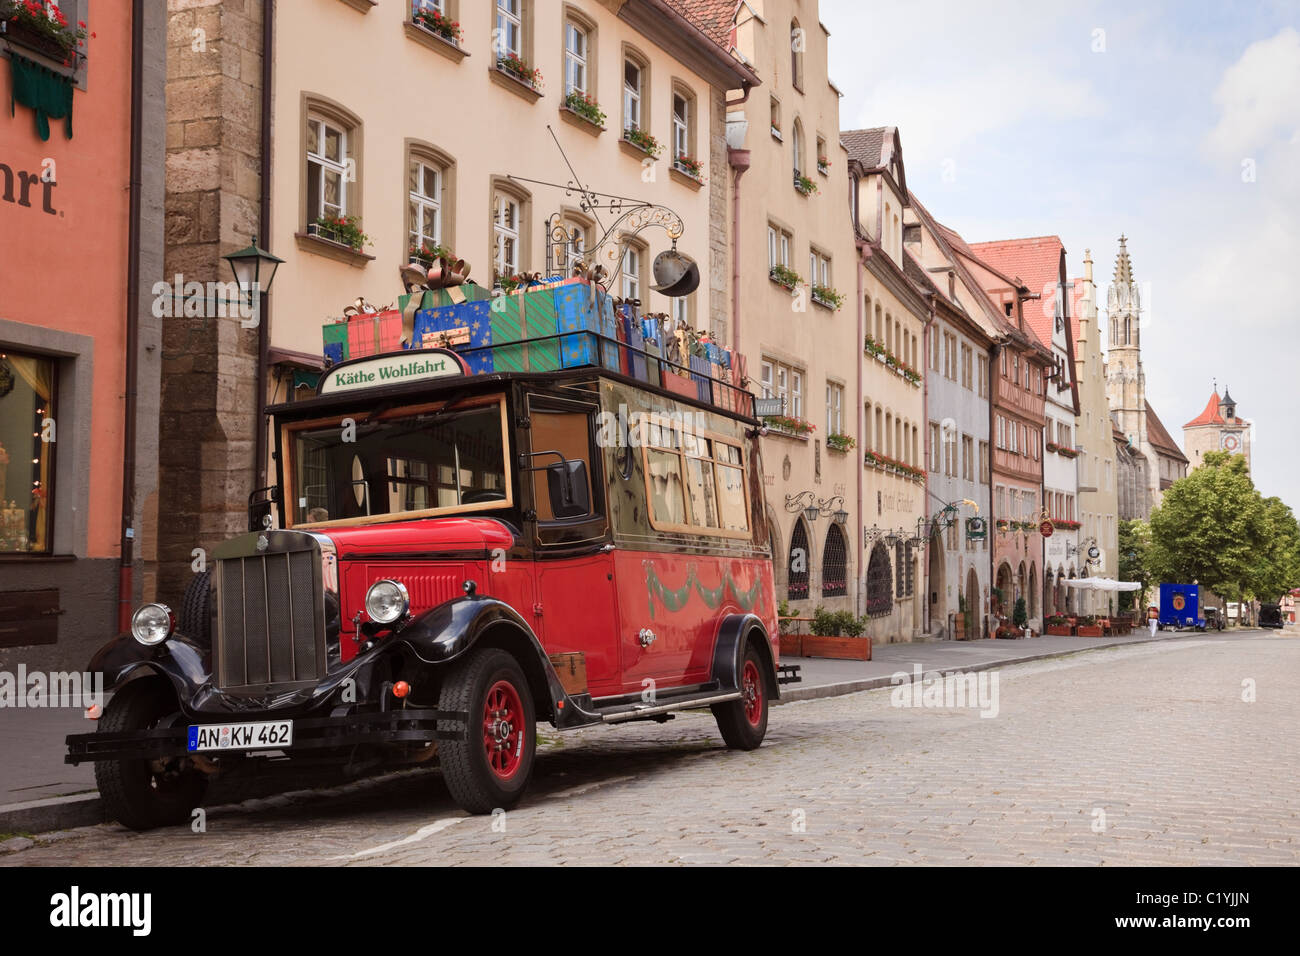 Red vintage Asquith car in cobbled street advertising famous Kathe Wohlfahrt Christmas store. Rothenburg Ob der Tauber, Bavaria, Germany, Europe Stock Photo